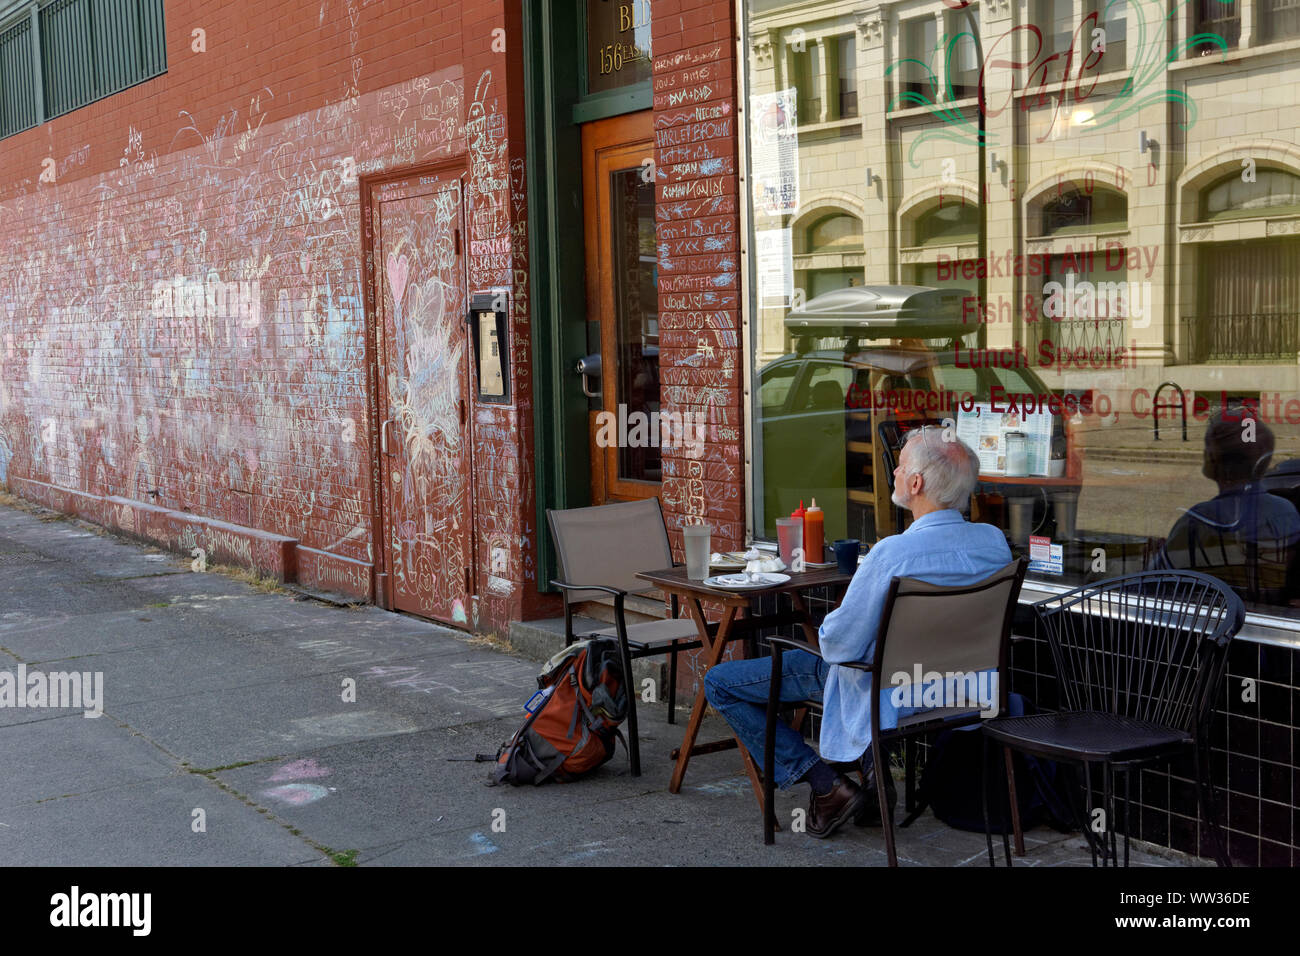 Older man sitting alone at a table outside a restaurant cafe in the Mount Pleasant district of Vancouver, BC, Canada Stock Photo